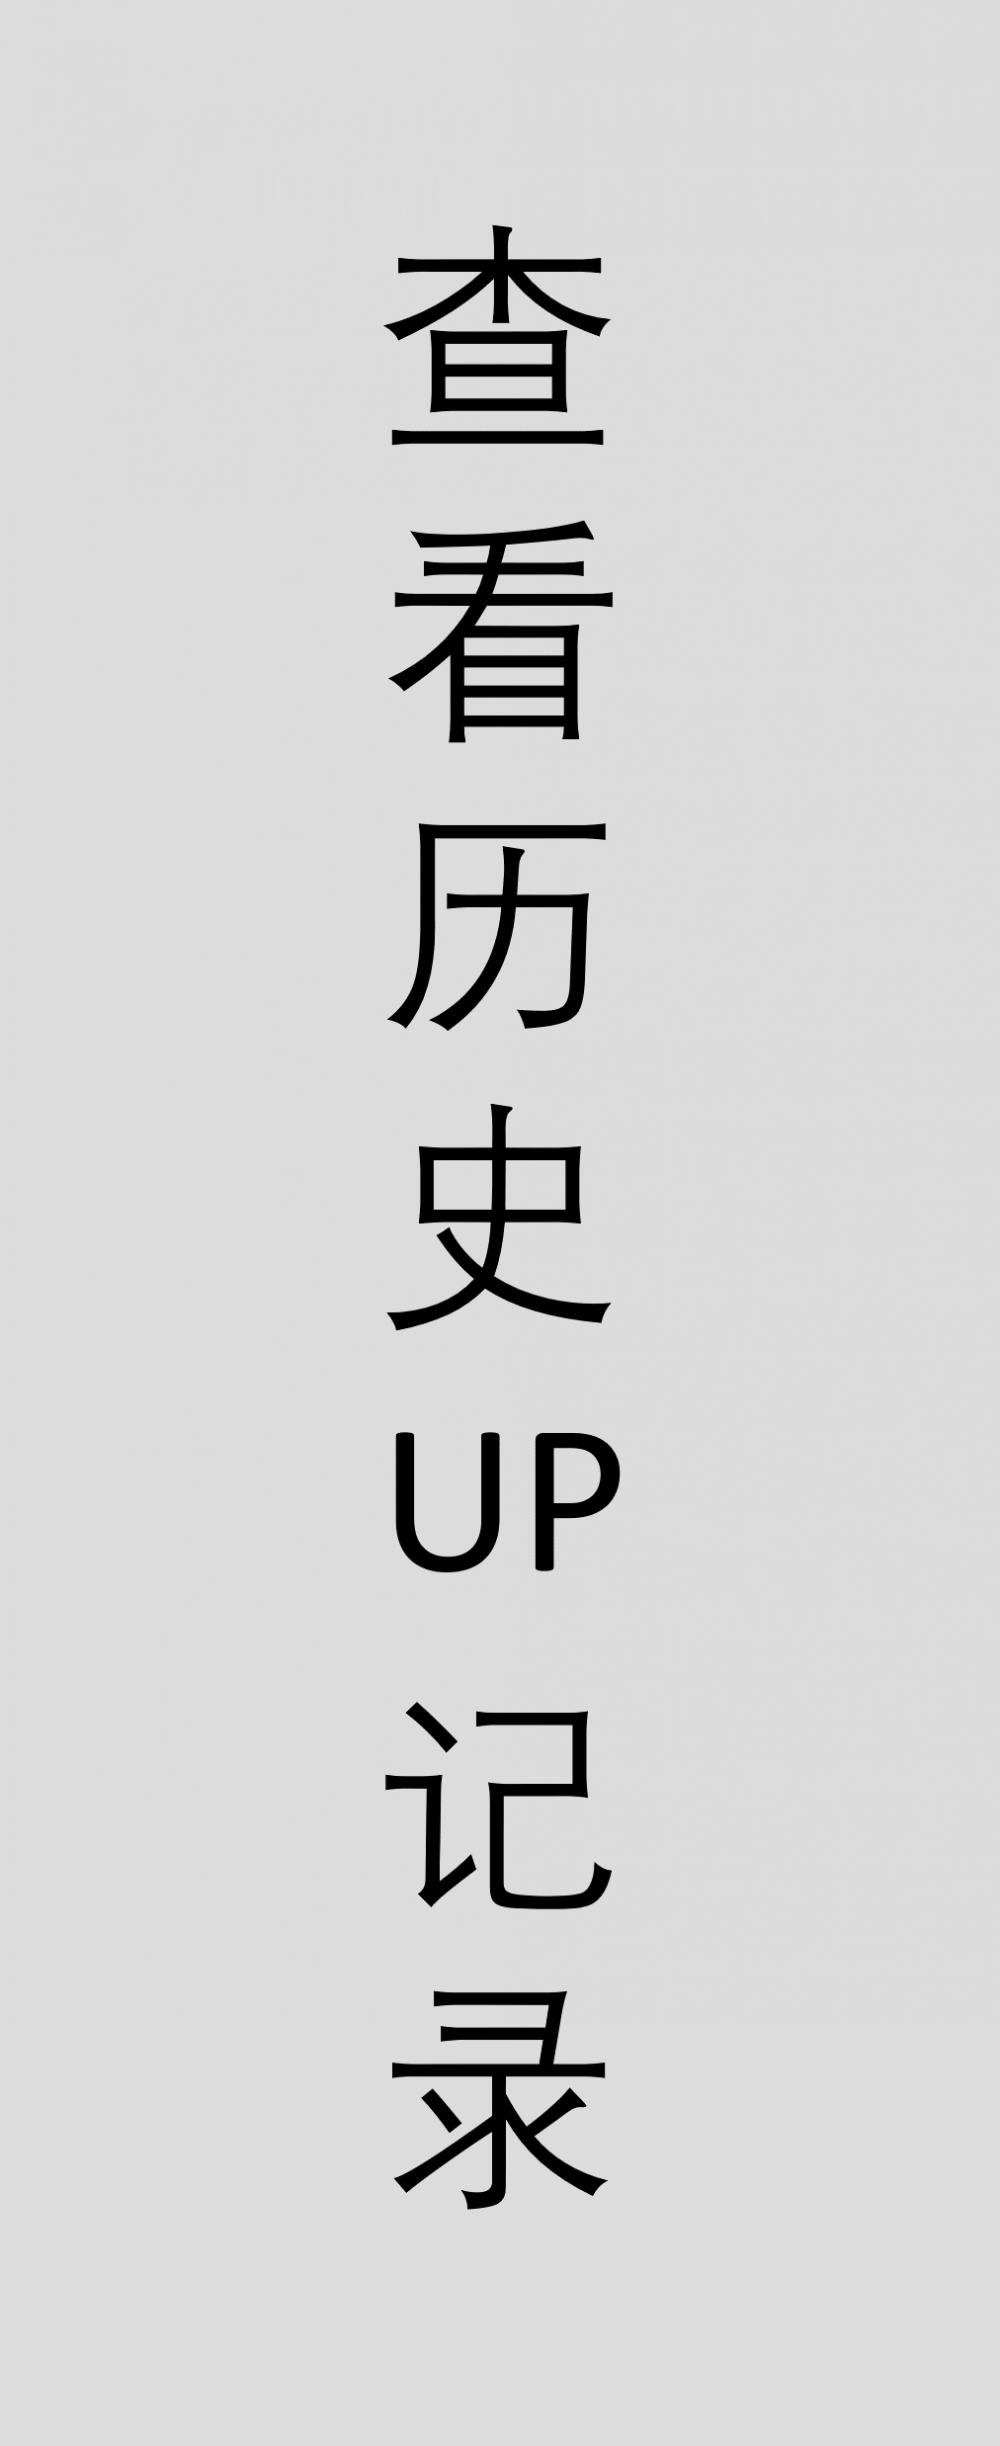 UP 记录